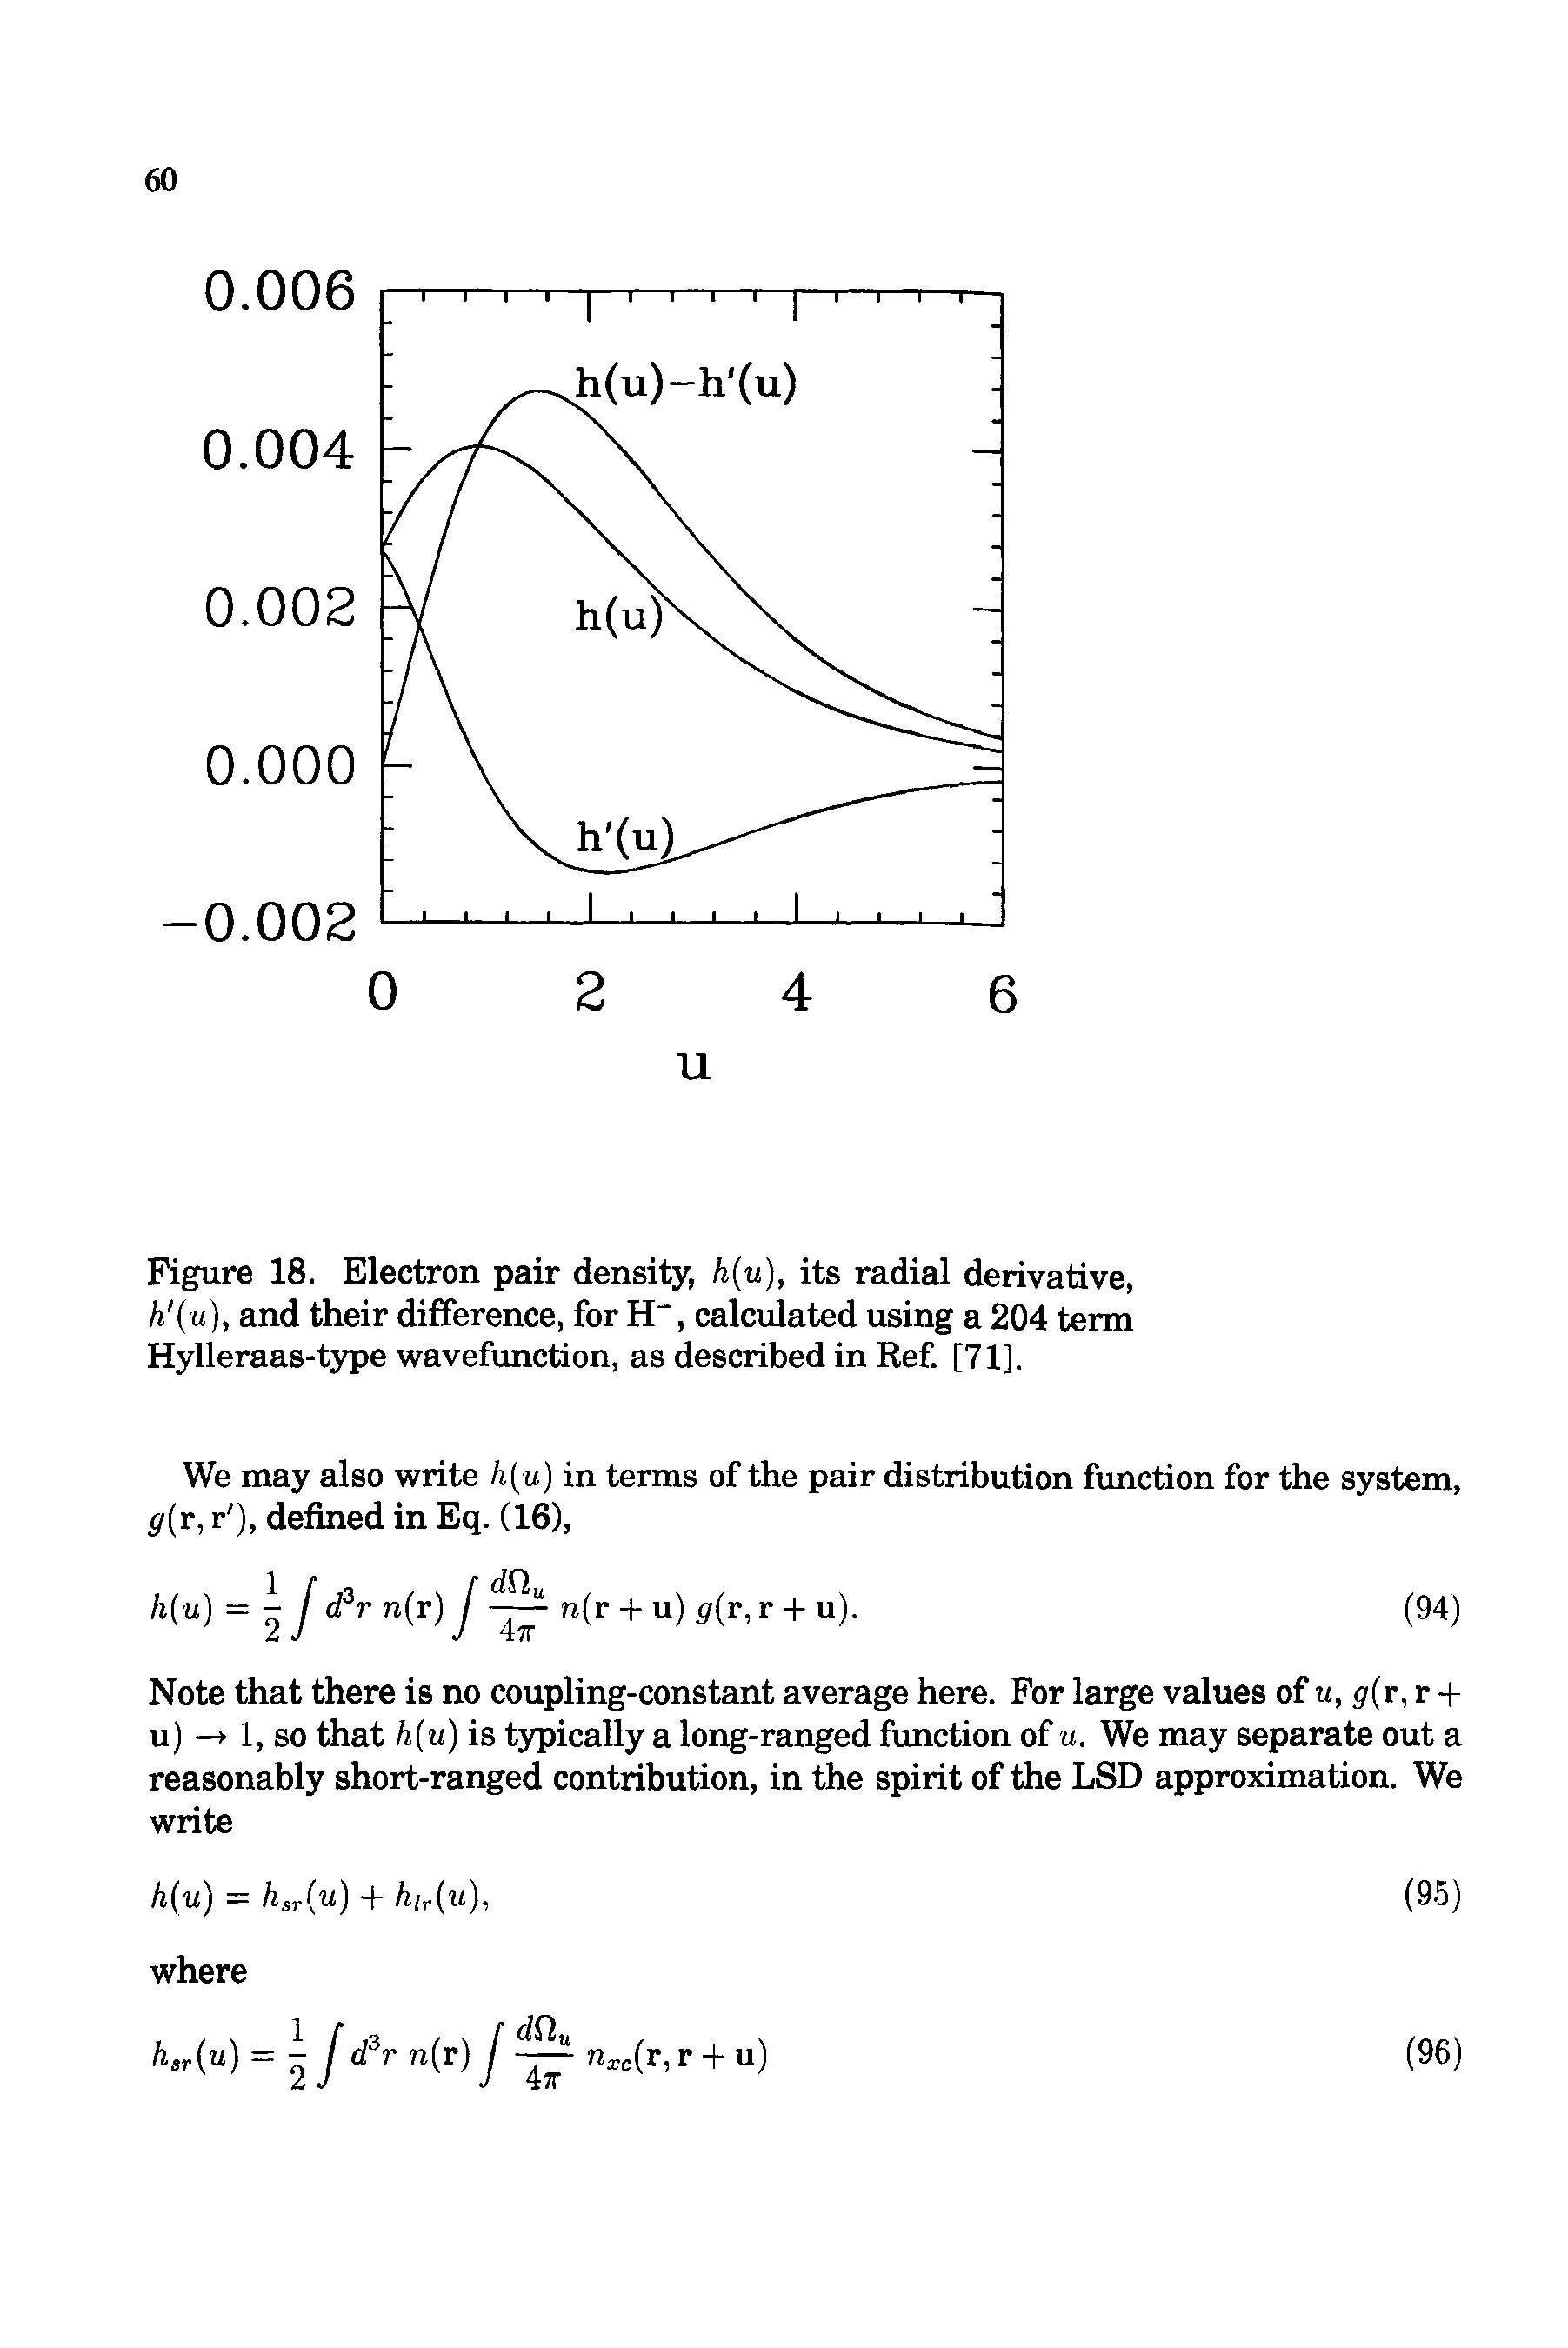 Figure 18. Electron pair density, h(u), its radial derivative, h (u ), and their difference, for H, calculated using a 204 term Hylleraas-type wavefunction, as described in Ref. [71],...